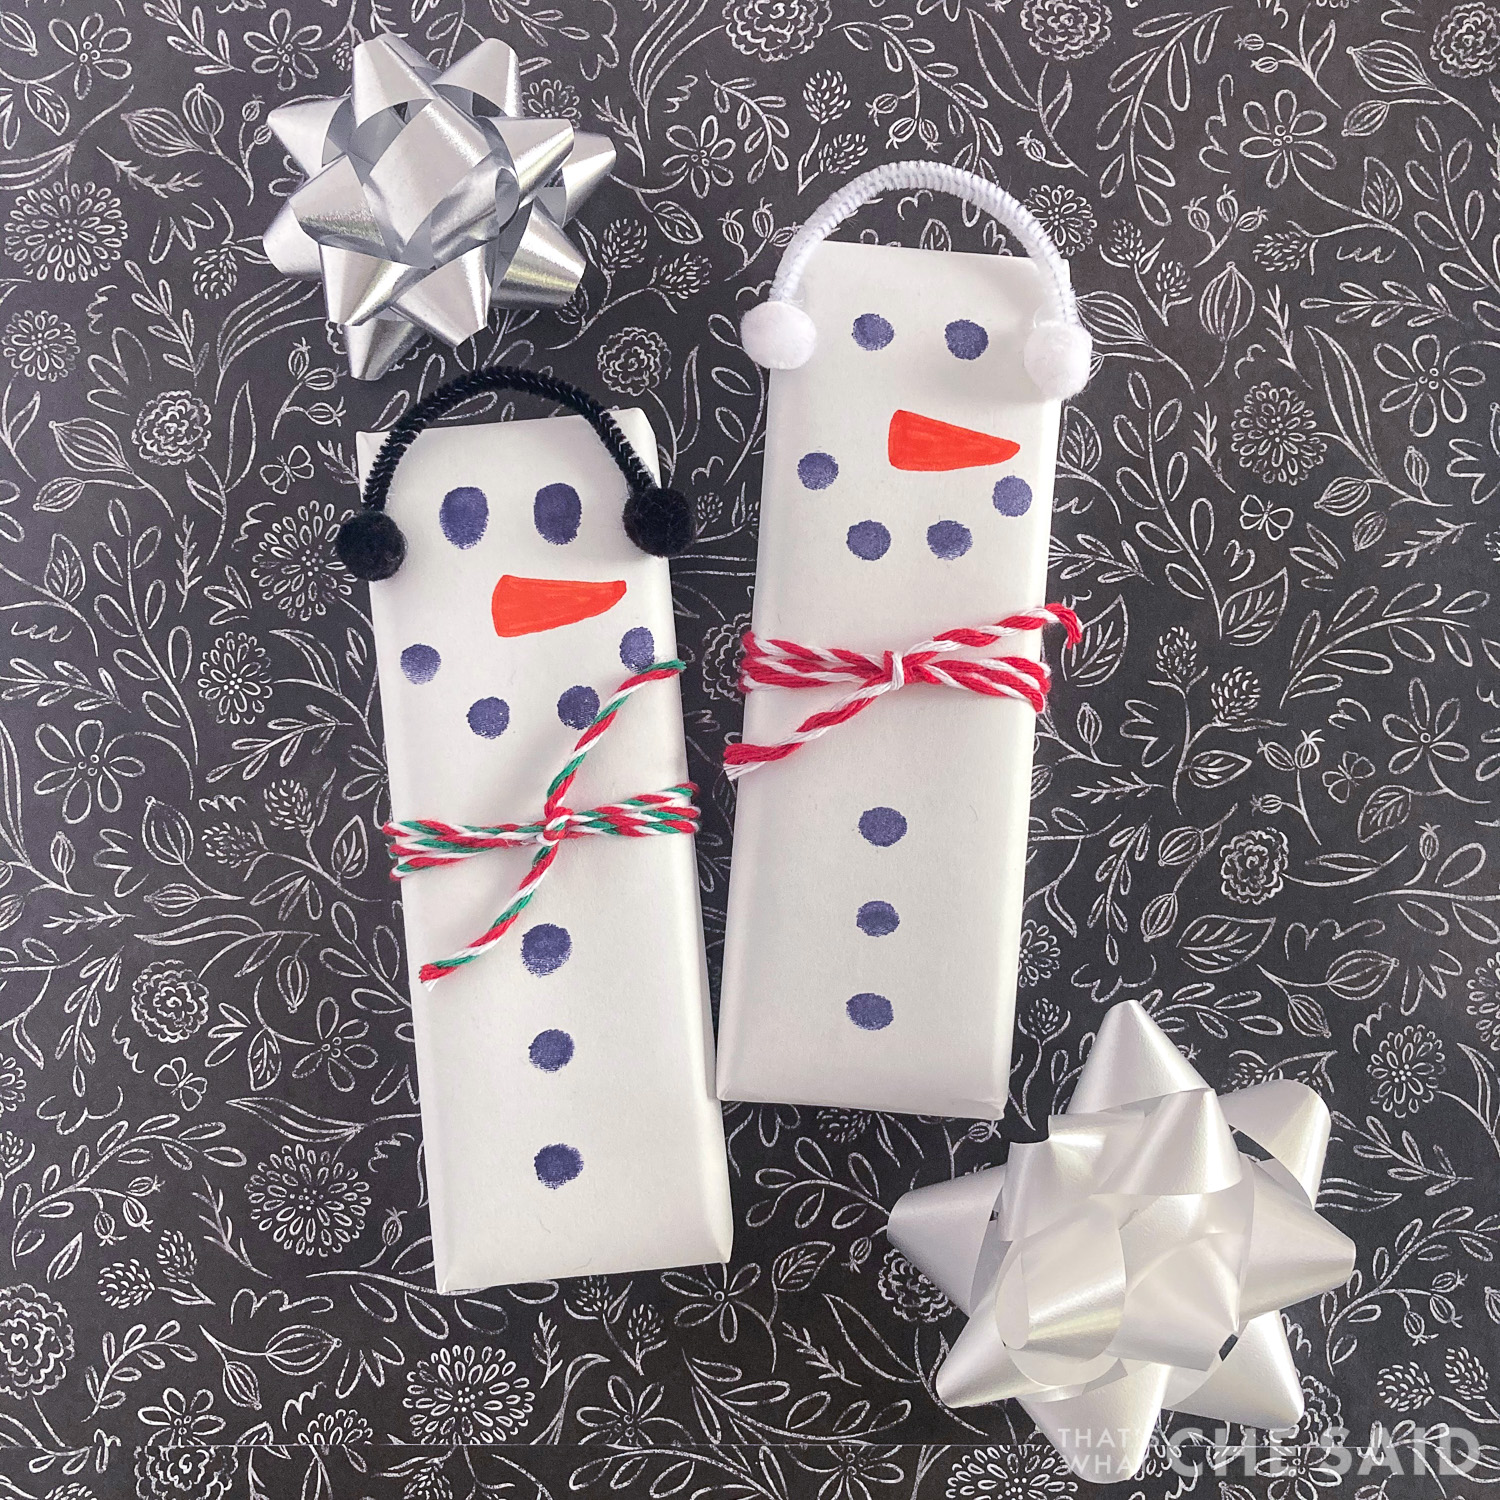 Square format of 2 complete snowman candy bars and gift bows